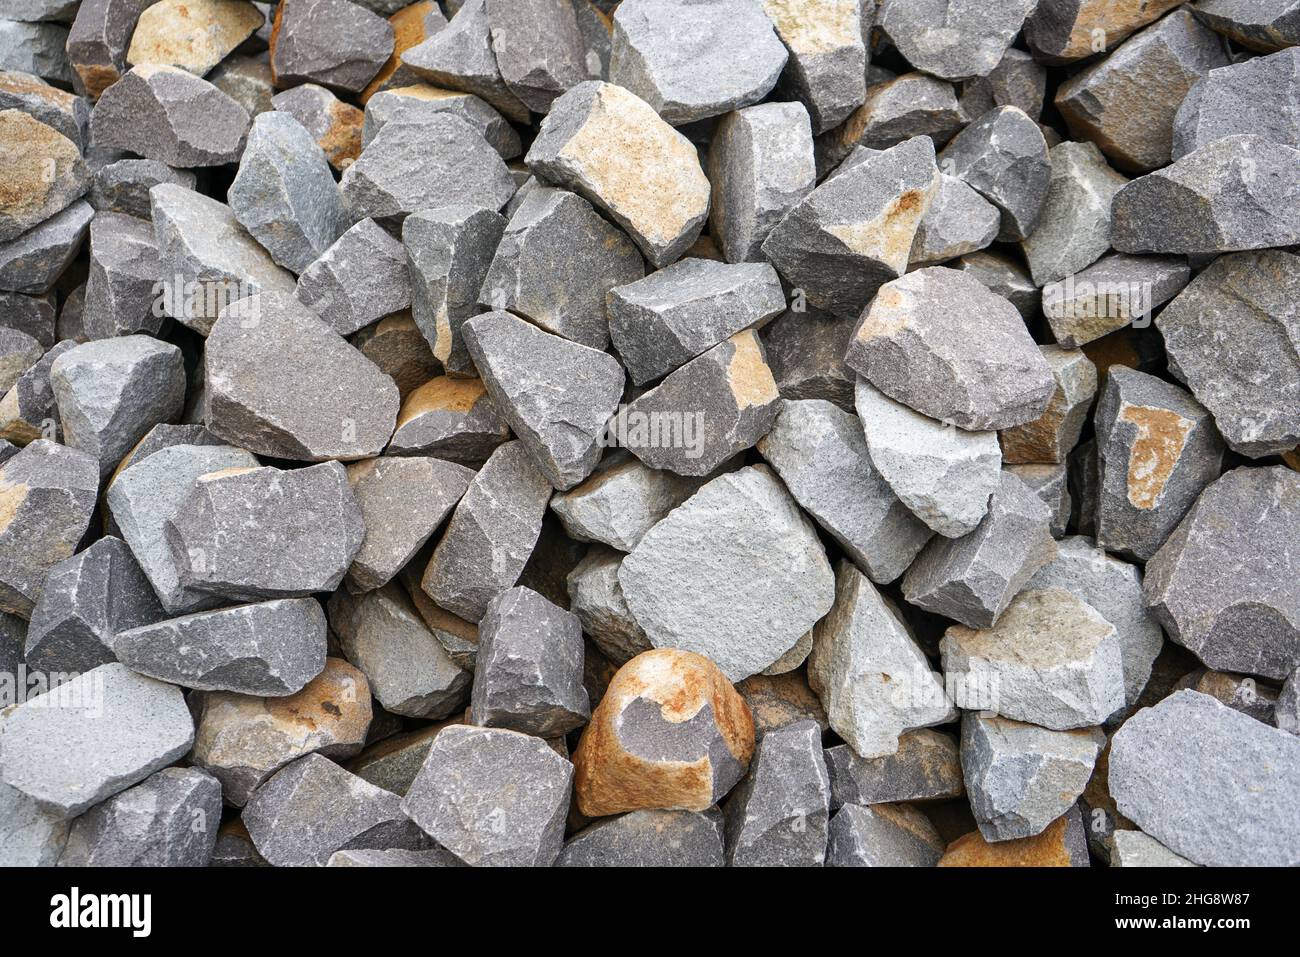 https://c8.alamy.com/comp/2HG8W87/river-stone-foundation-is-a-type-of-shallow-foundation-used-in-buildings-with-light-loads-such-as-houses-the-river-stone-foundation-is-composed-2HG8W87.jpg